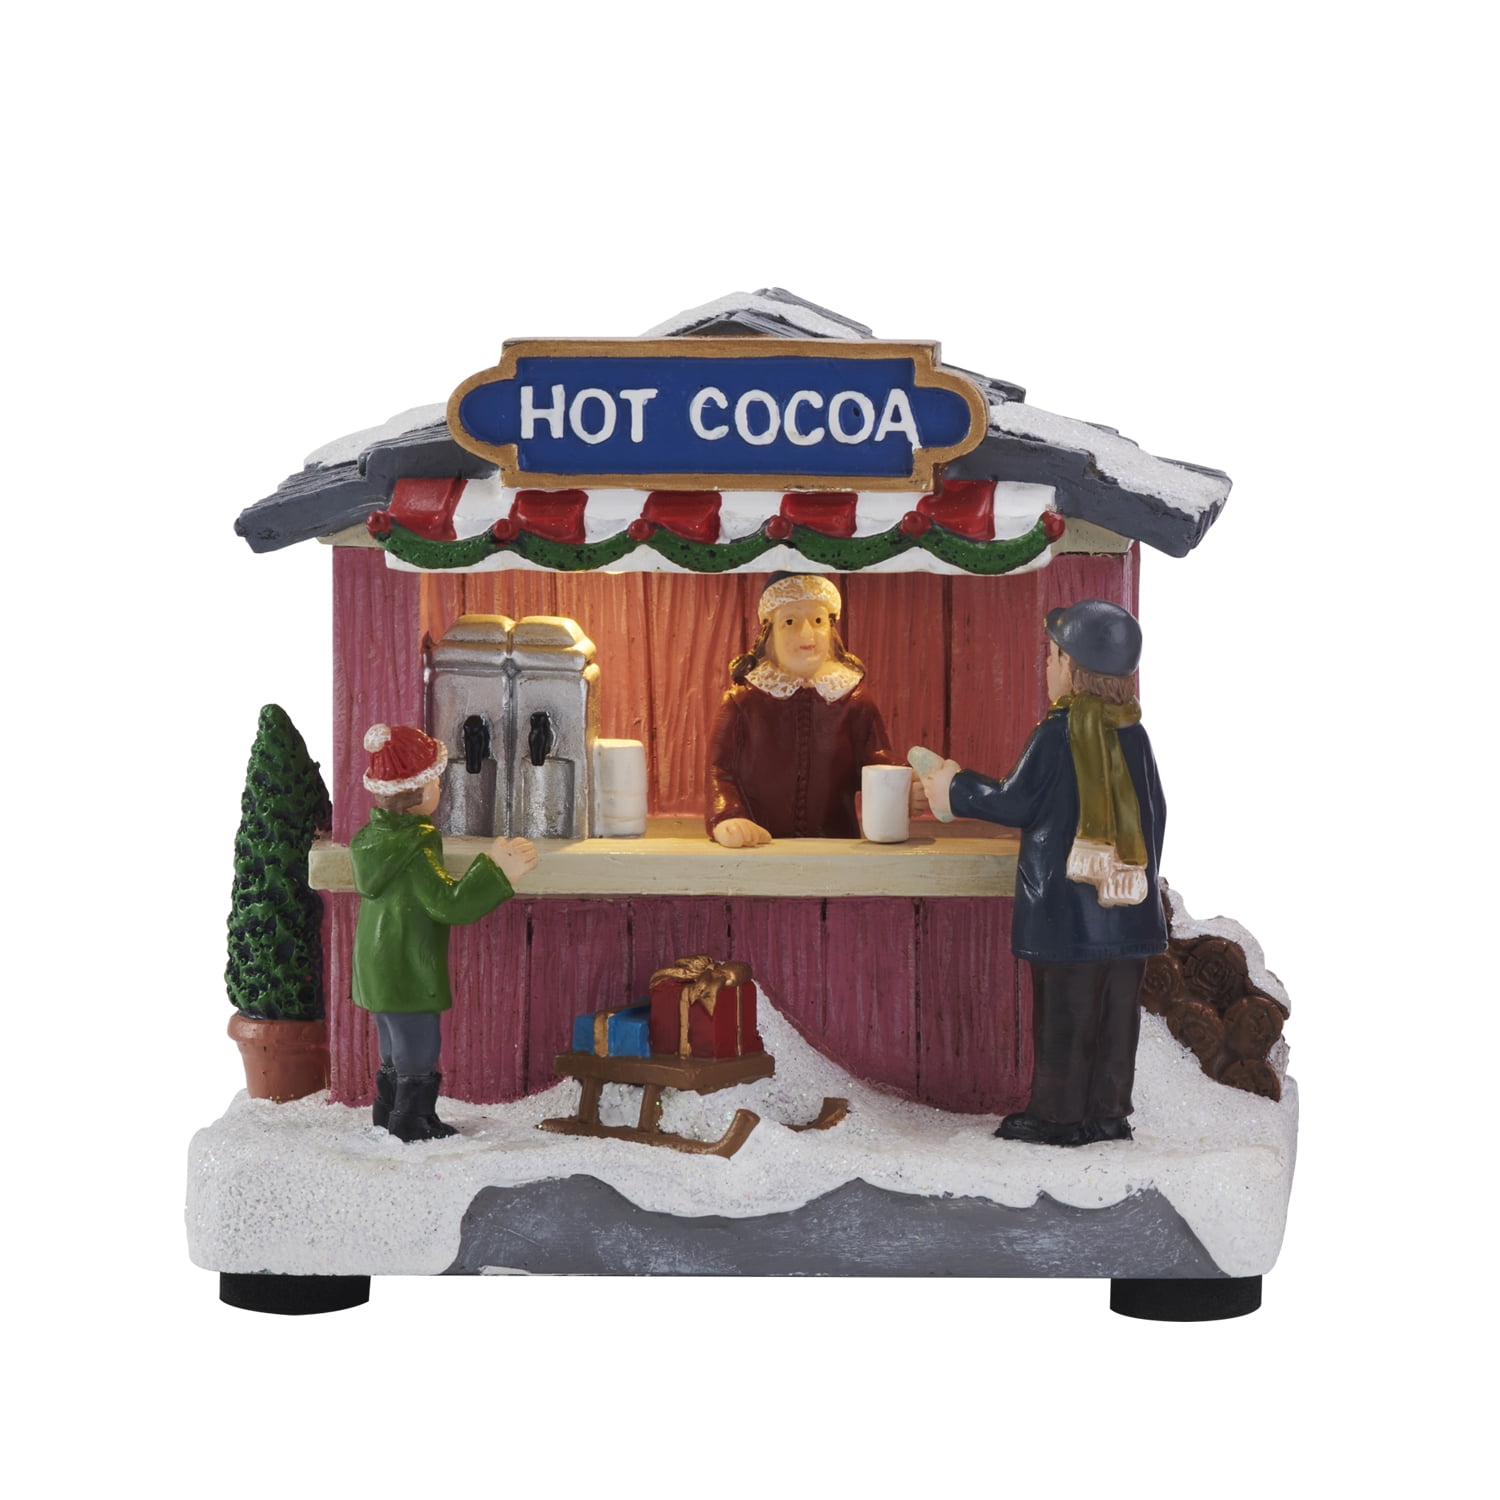 Hot Cocoa Stand Complete With Accessories and Decor 